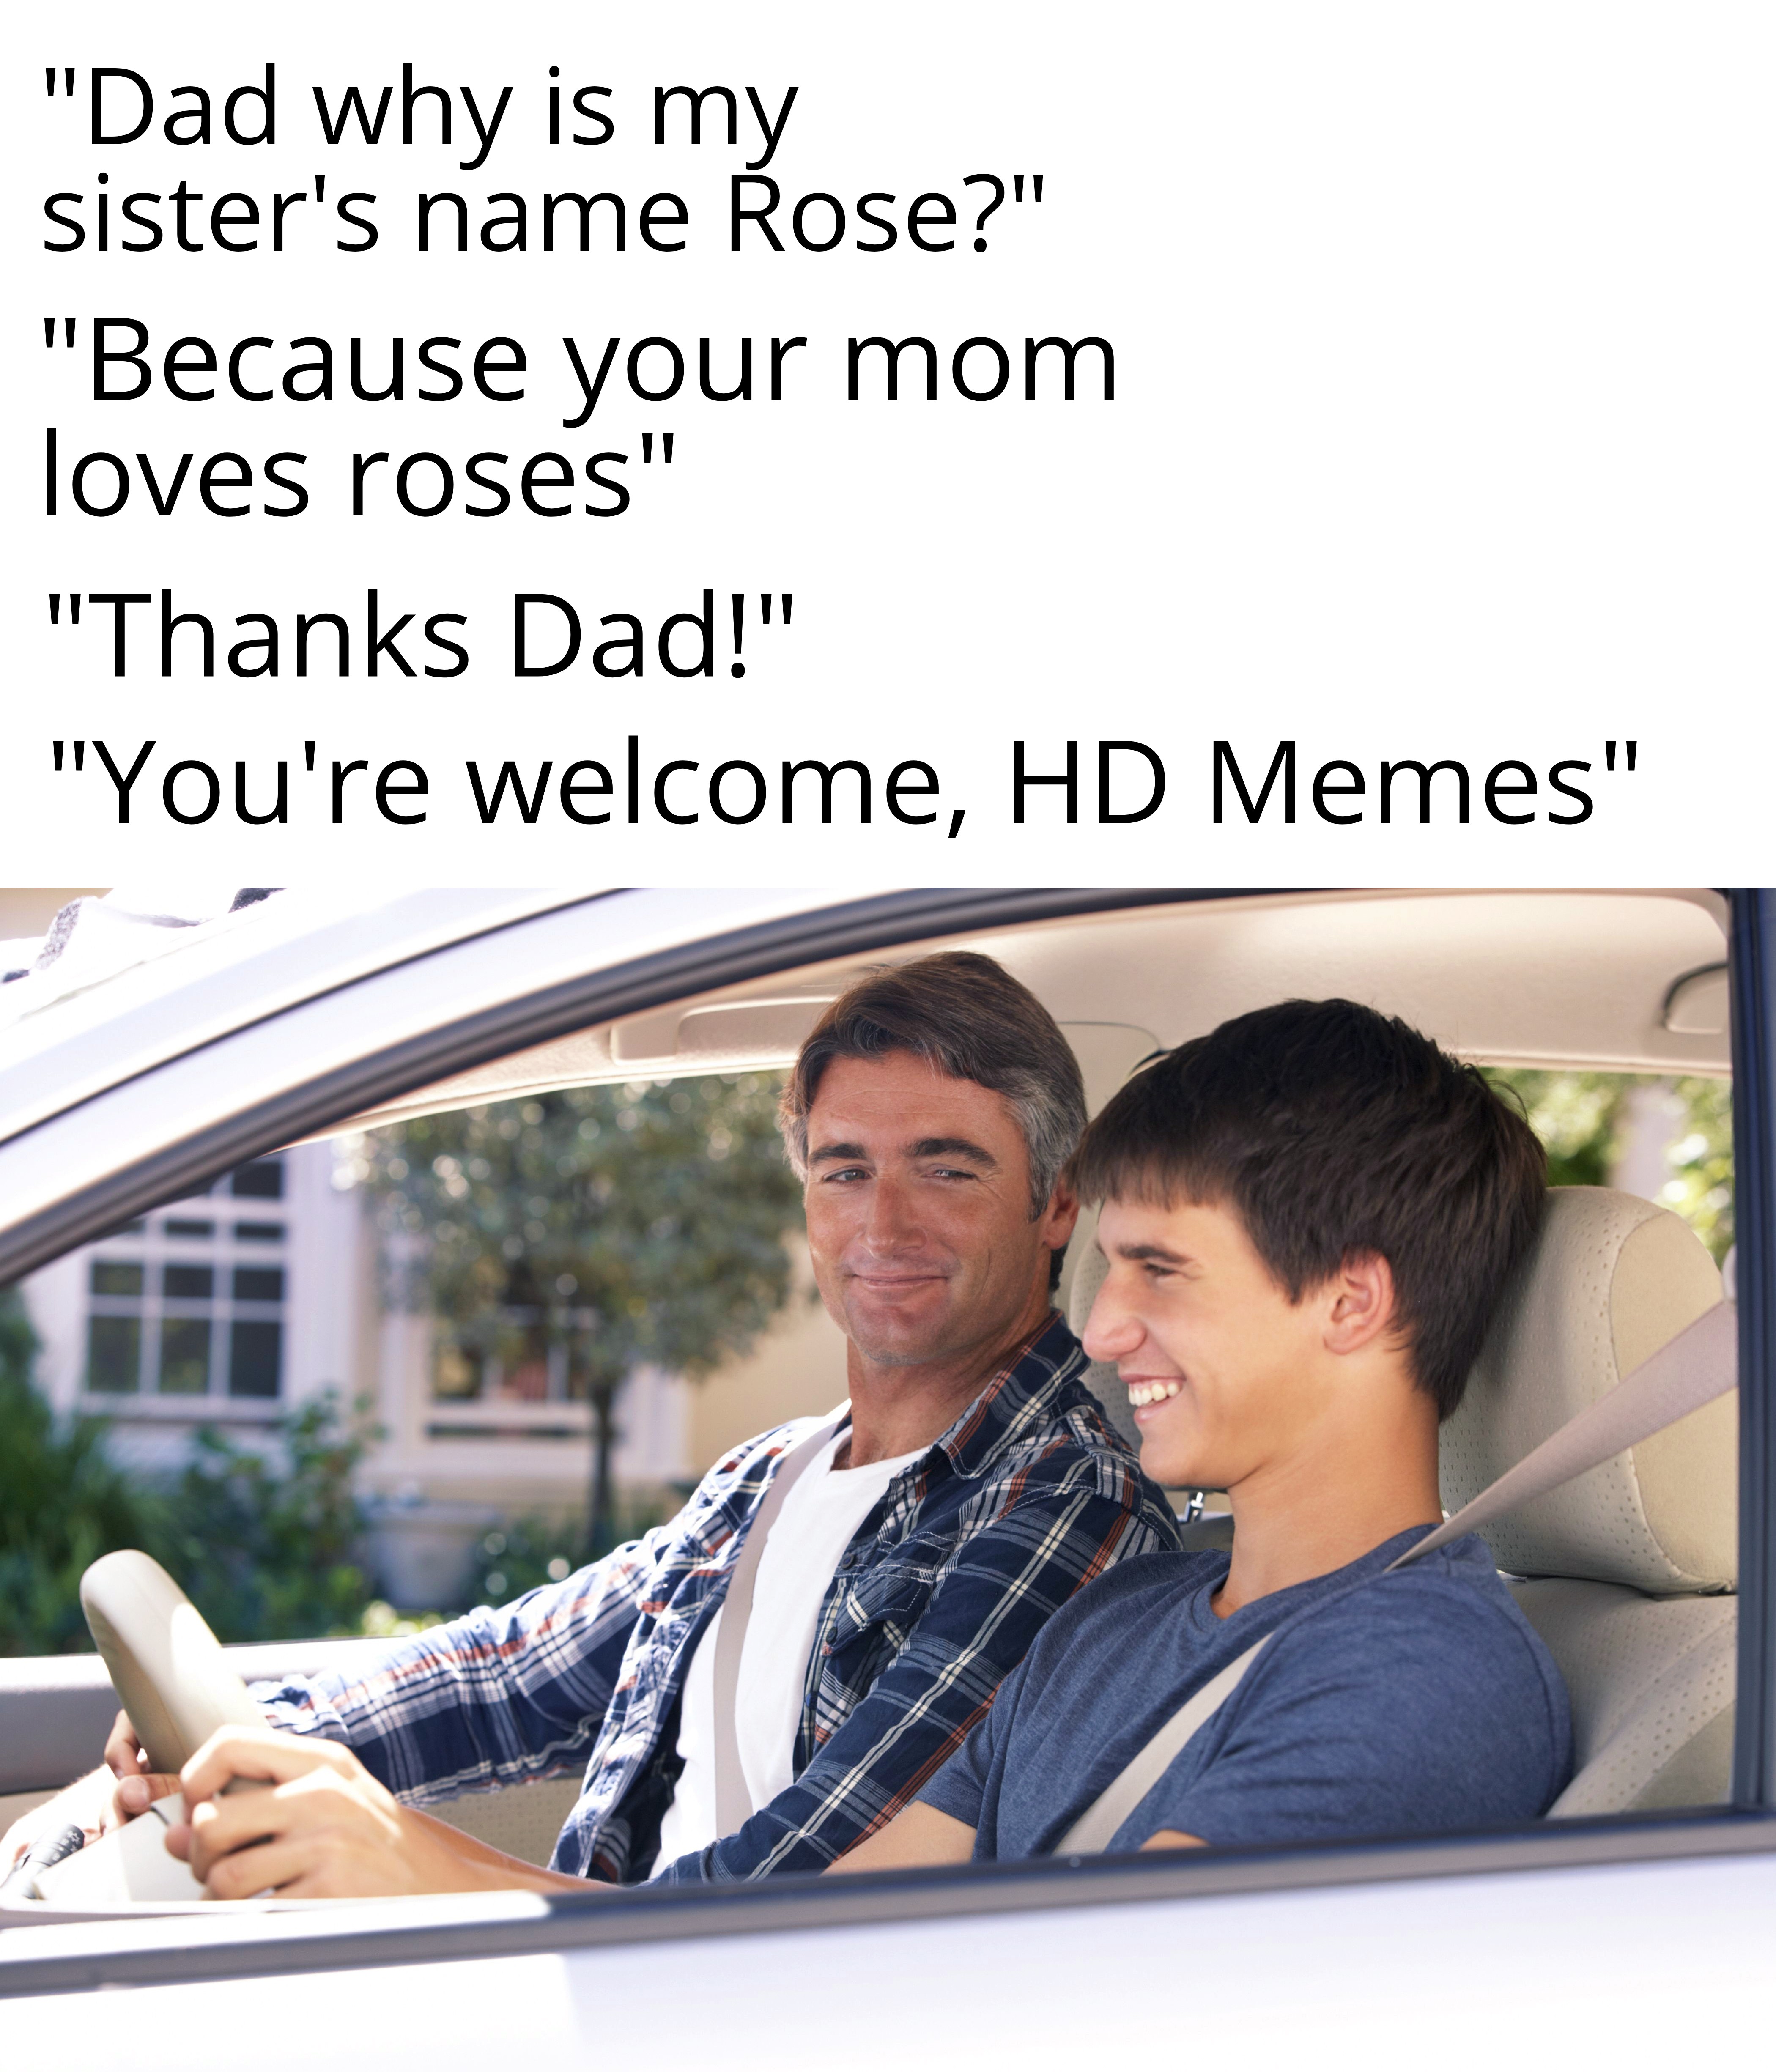 dank memes - arctic monkeys meme - "Dad why is my sister's name Rose?" "Because your mom loves roses" "Thanks Dad!" "You're welcome, Hd Memes"